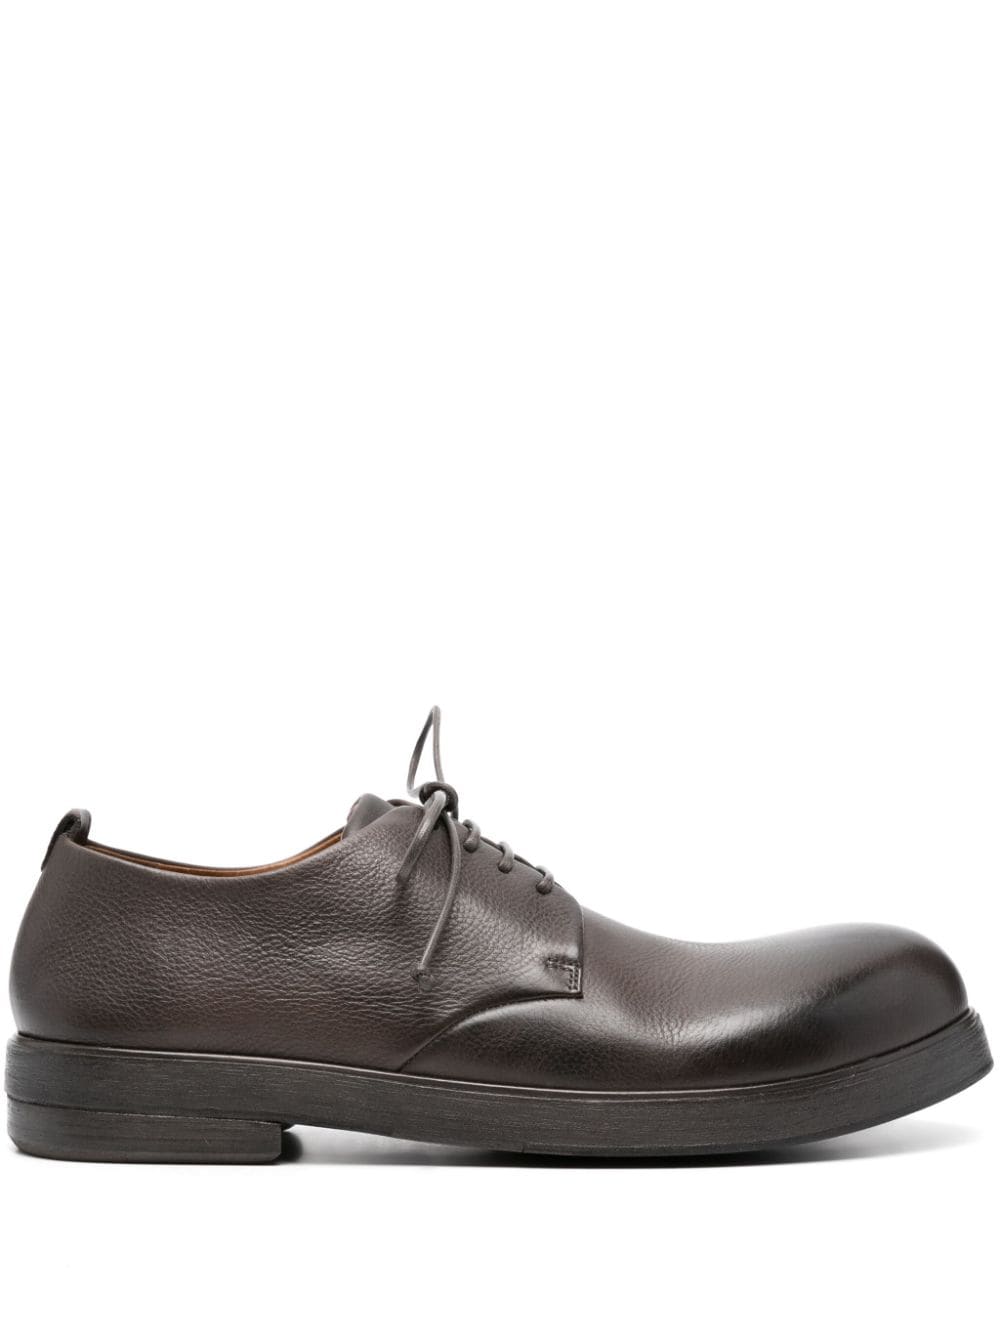 Marsèll Zucca Zeppa Leather Derby Shoes In Brown